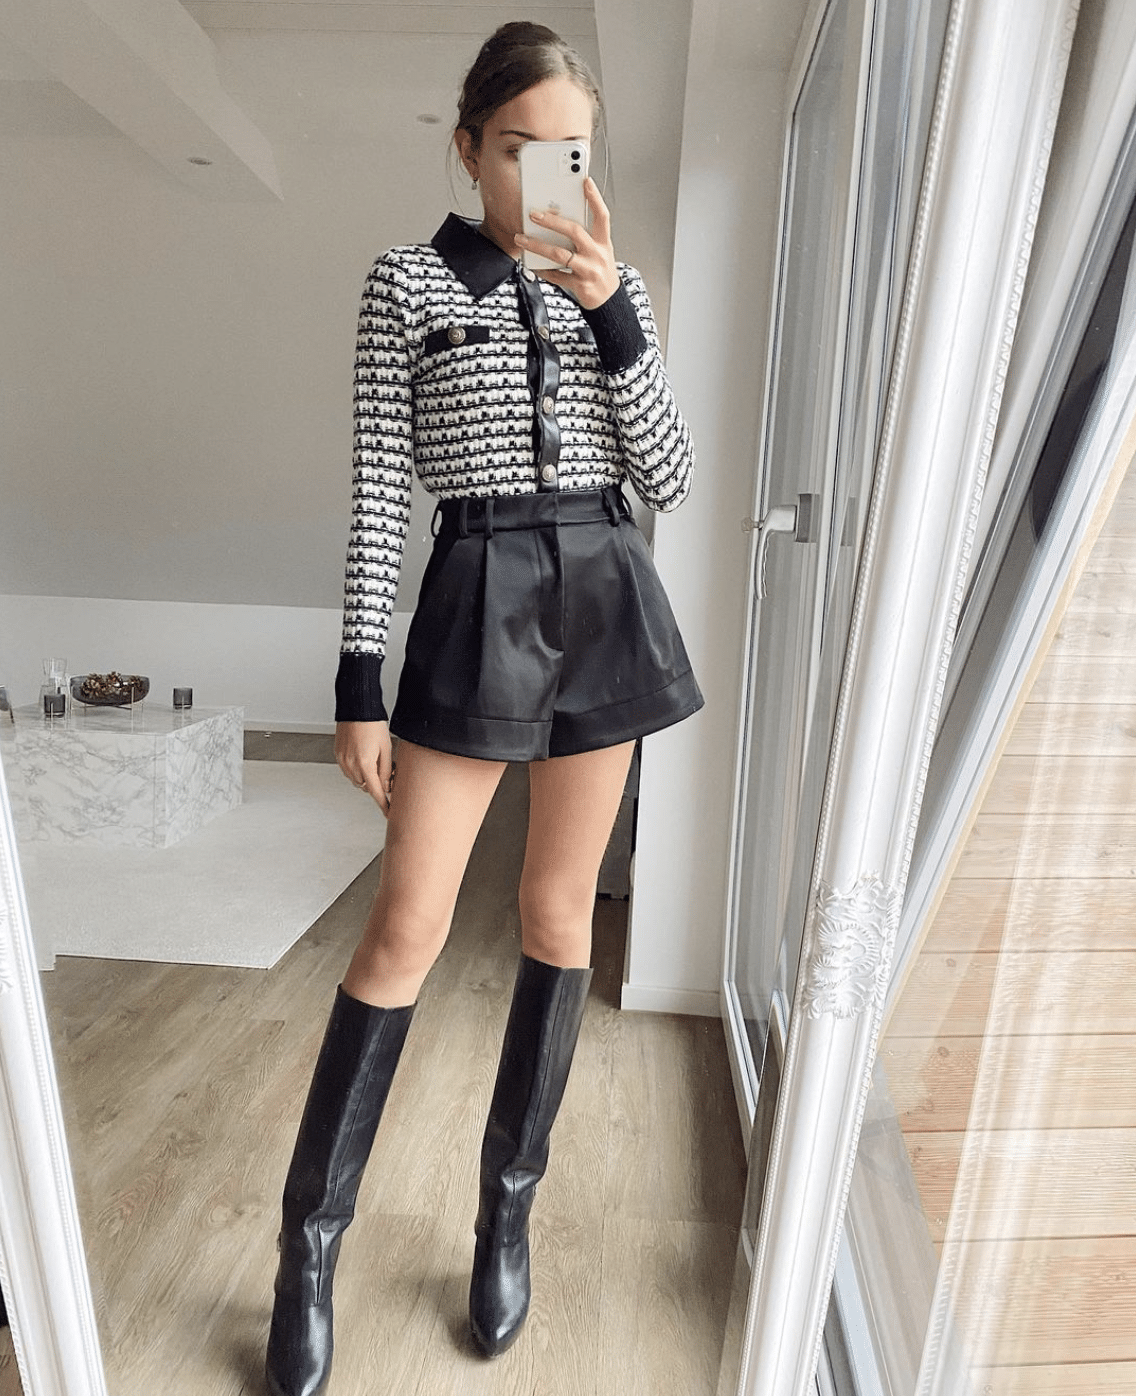 Leather skirt black and white outfit